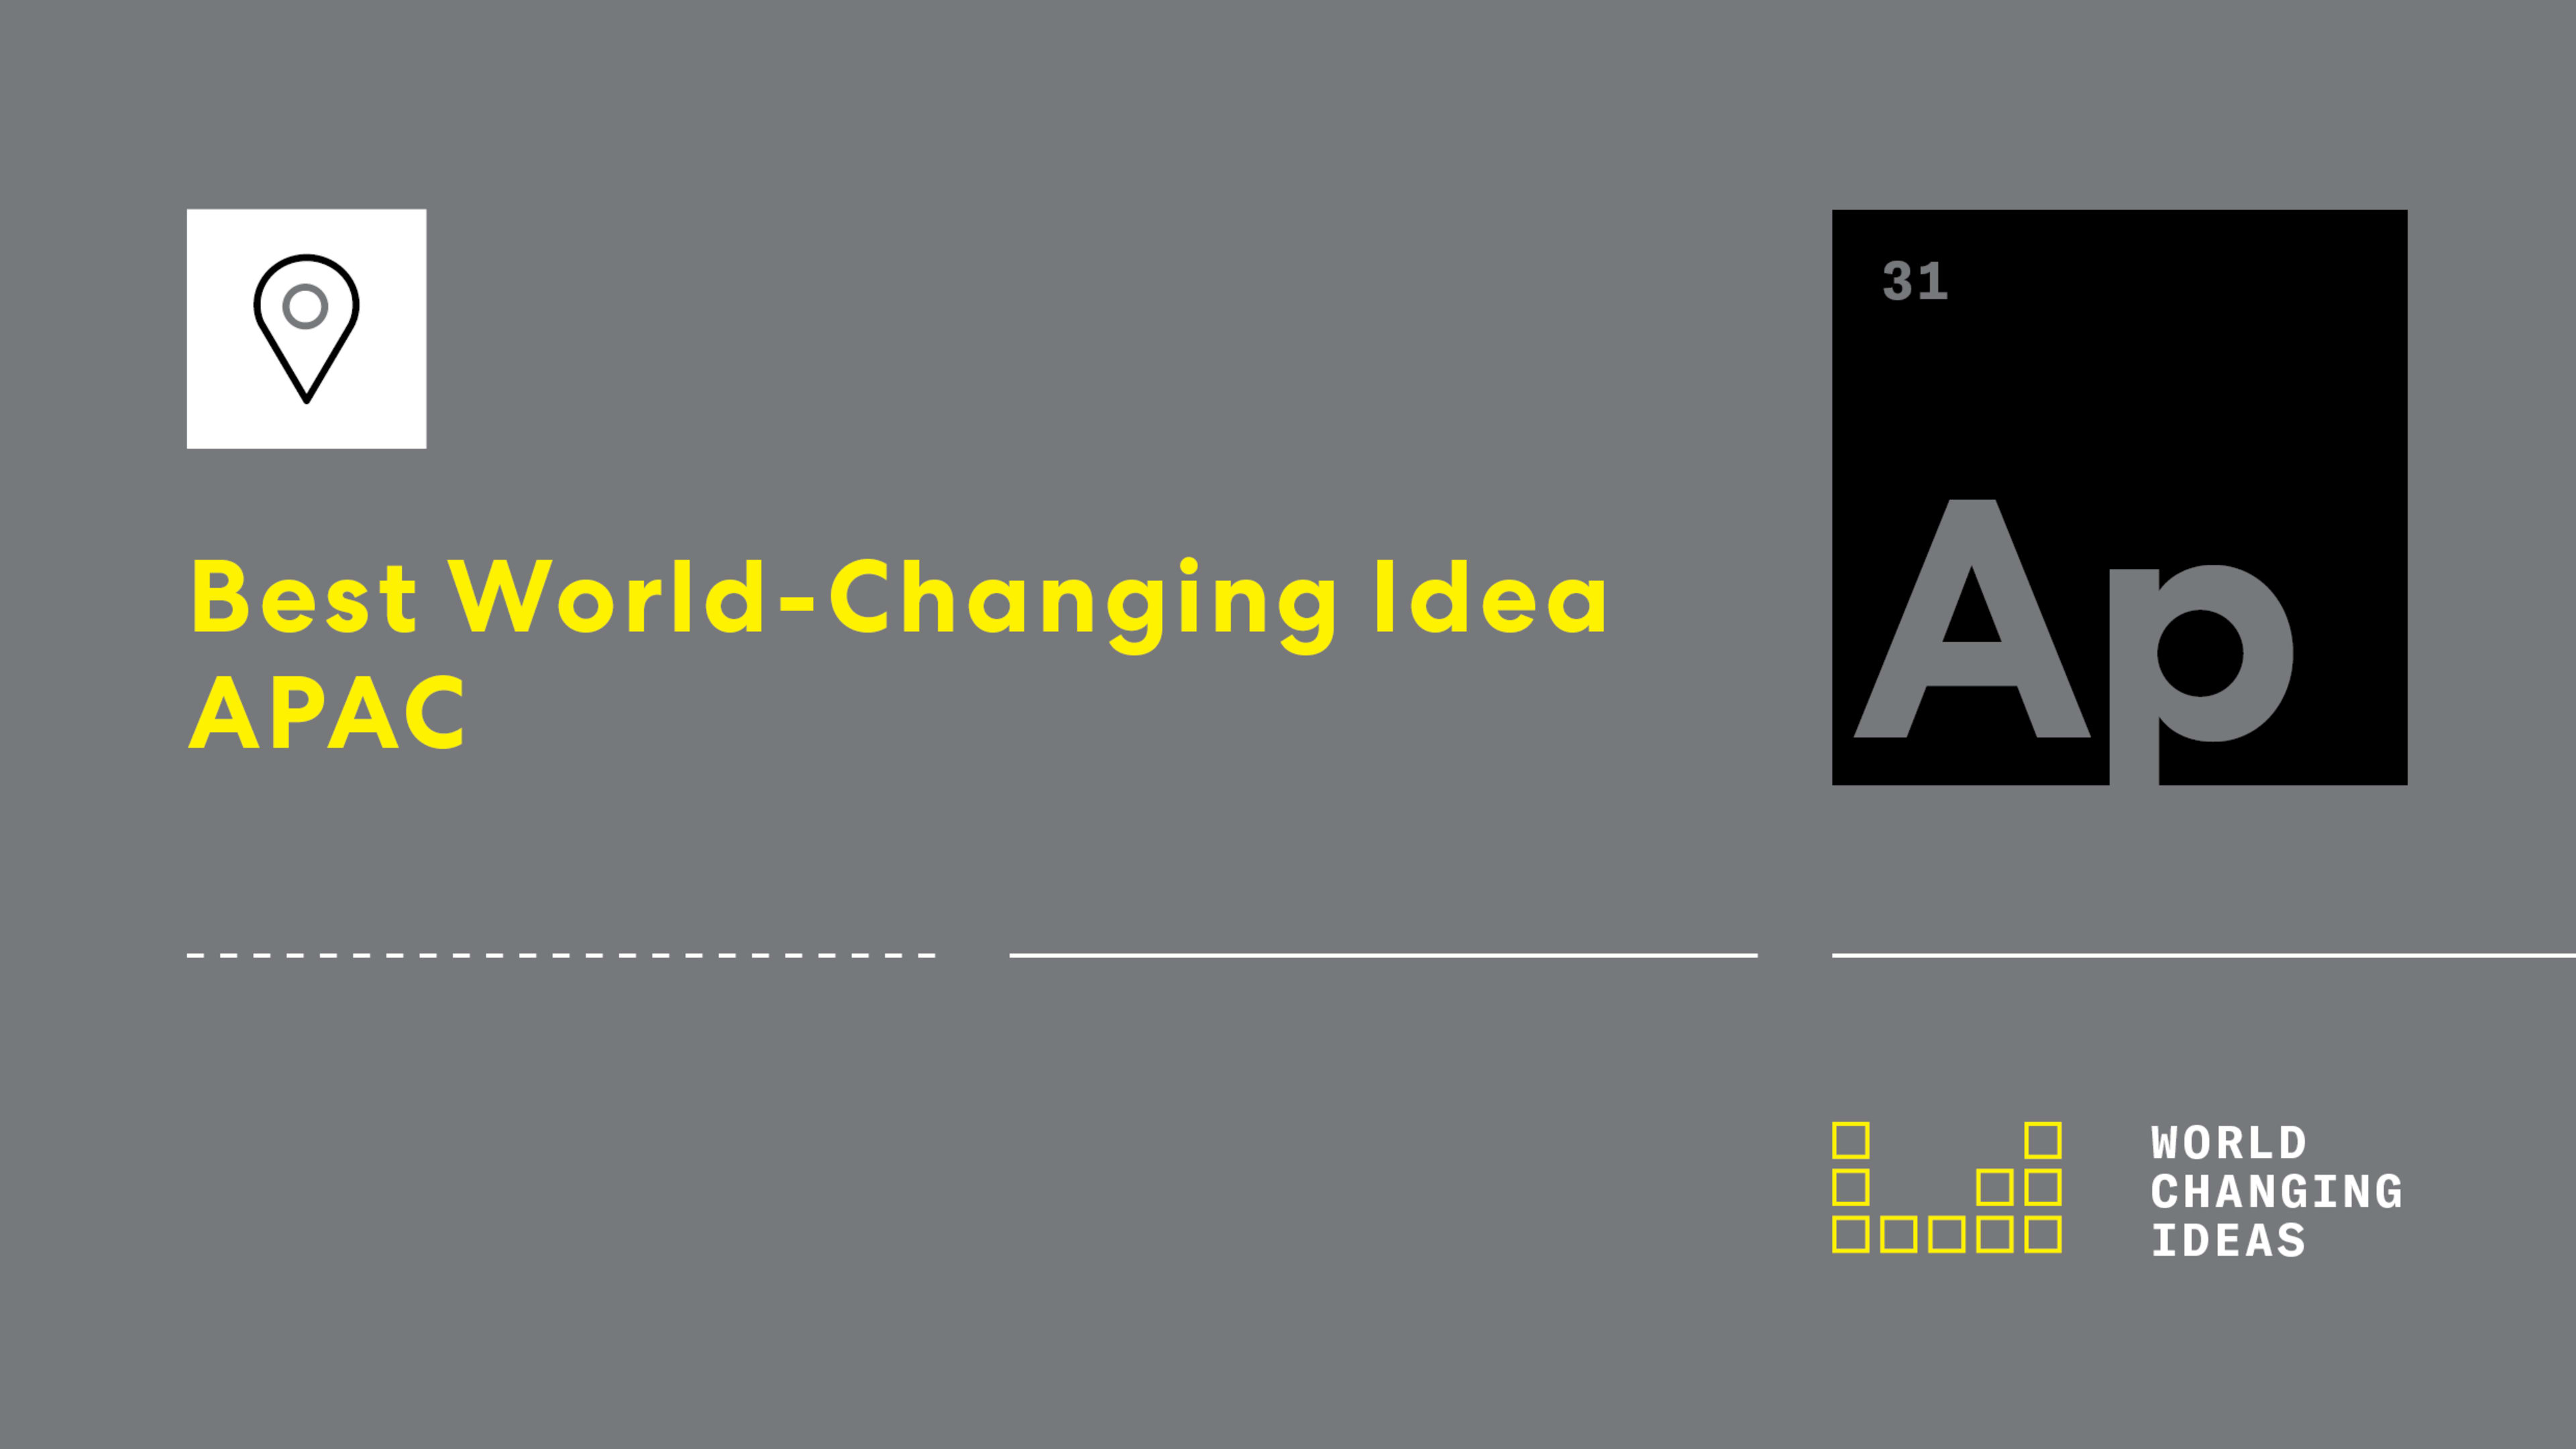 World Changing Ideas Awards 2021: Asia-Pacific Finalists and Honorable Mentions